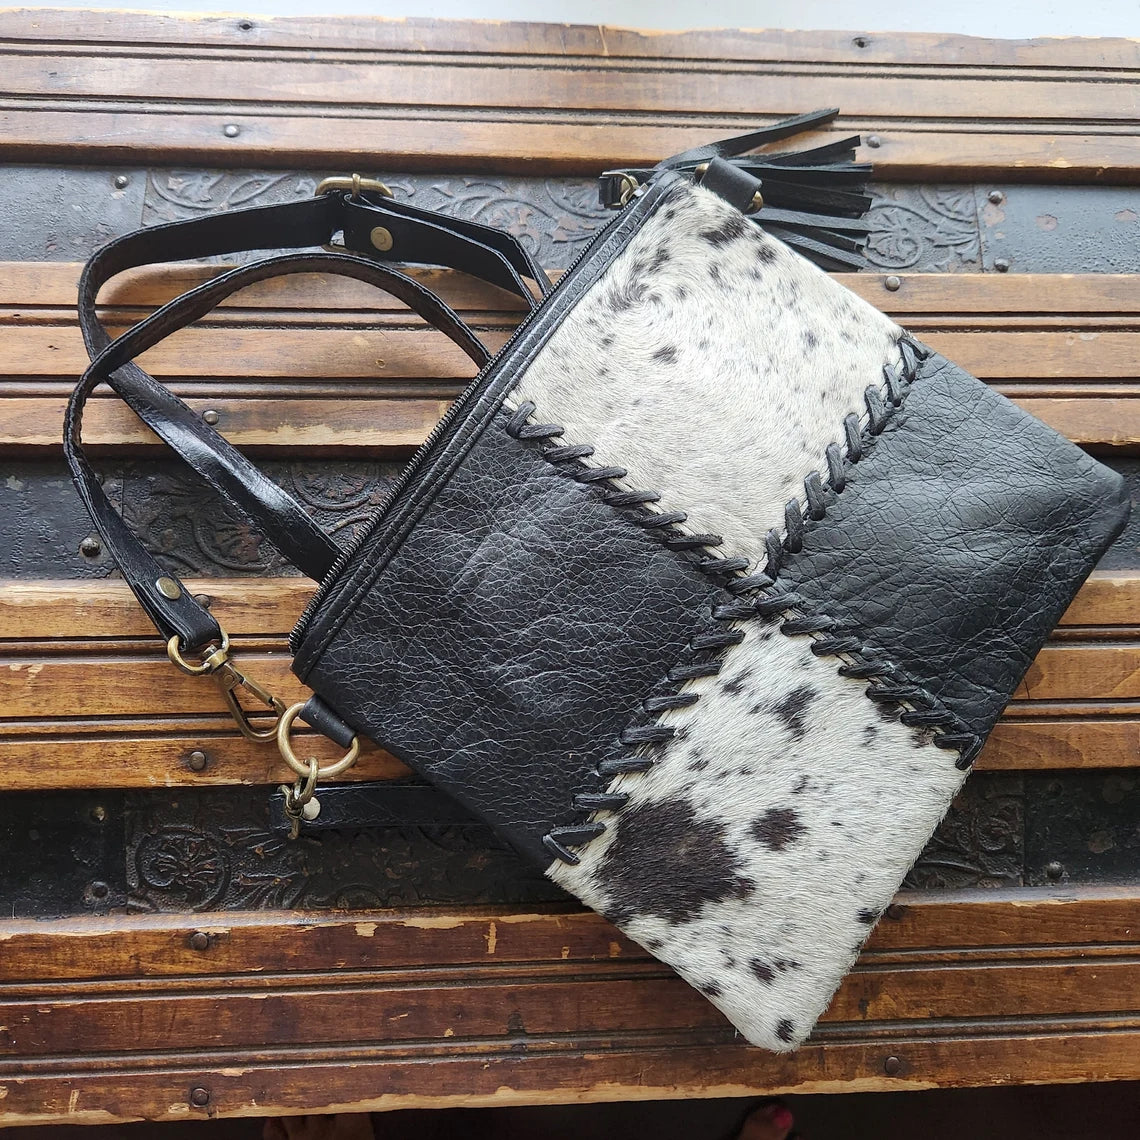 Square leather and Cowhide Convertible bag | wristlet | clutch | crossbody